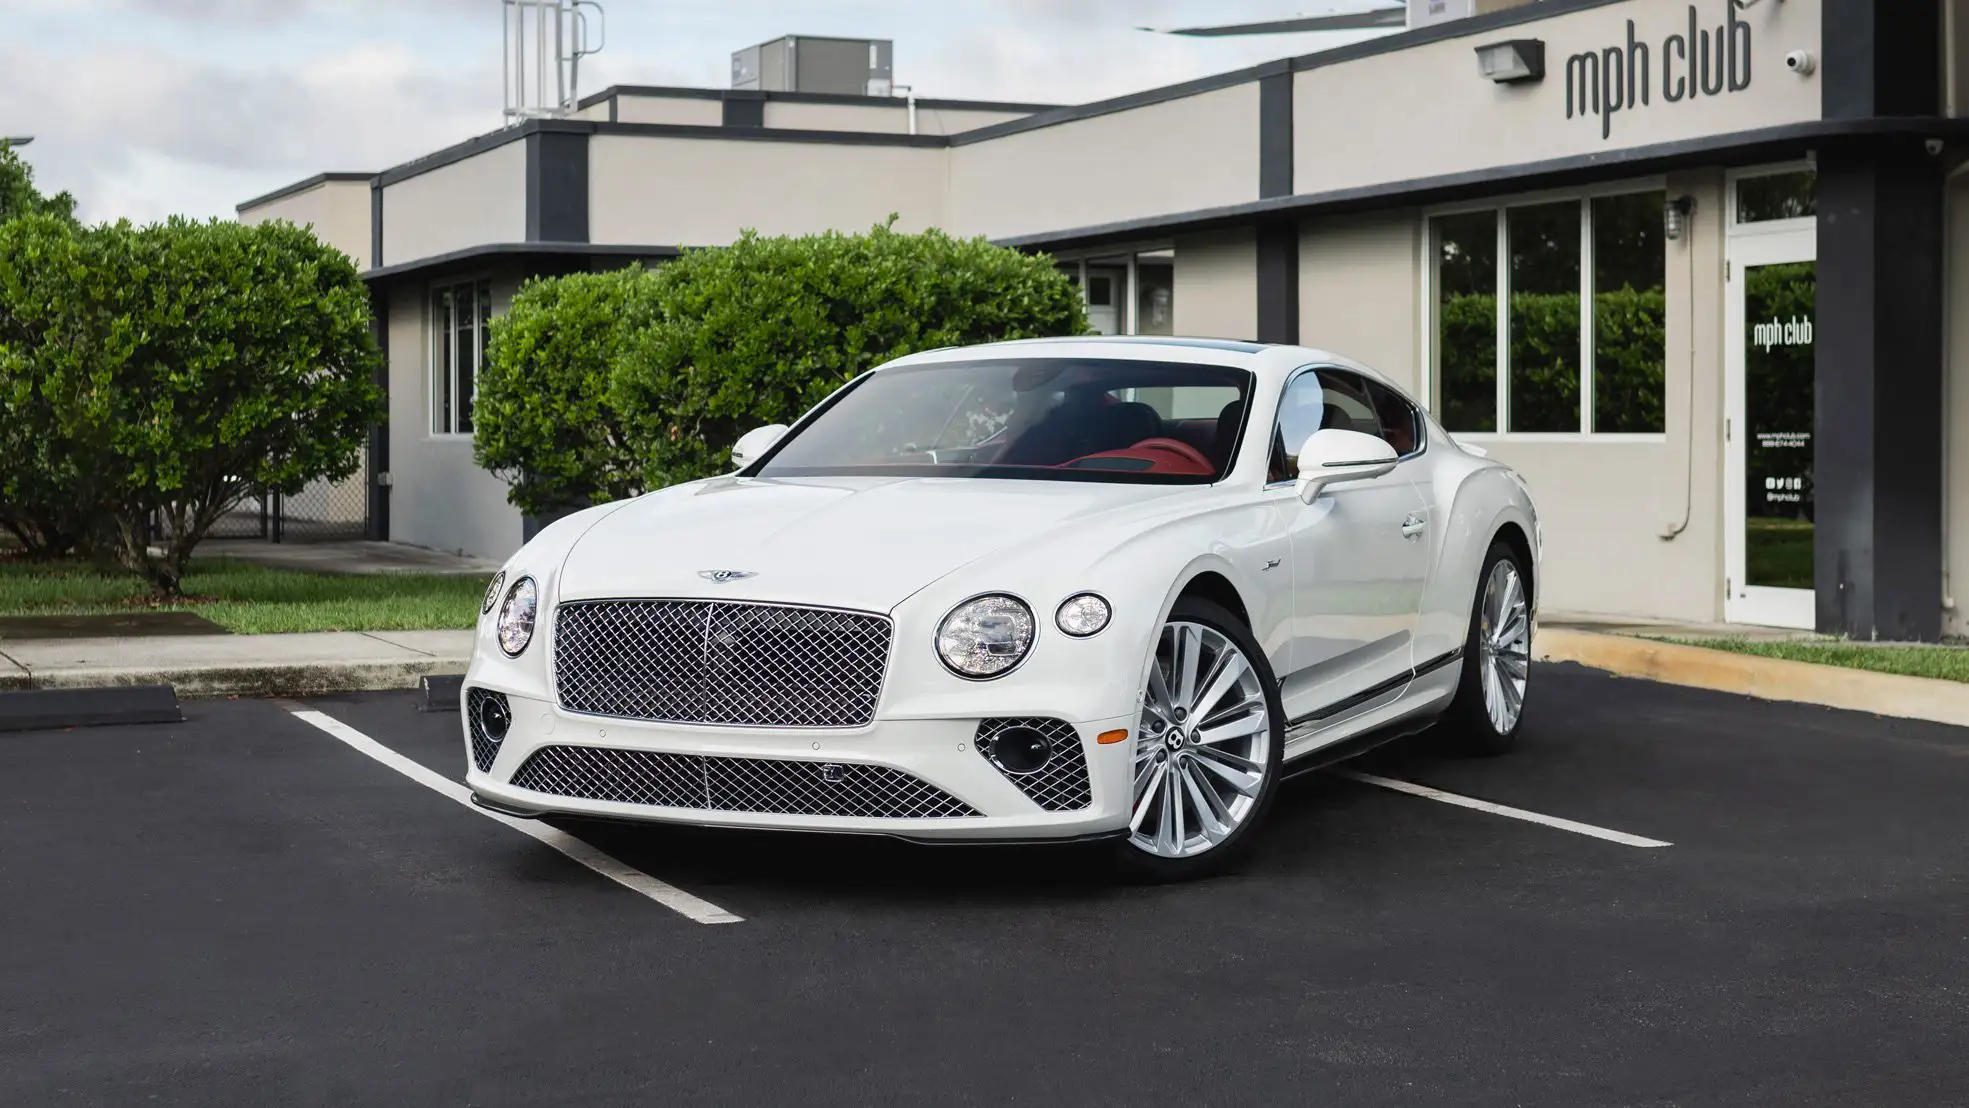 2022 White Bentley Continental GT Speed for sale exterior 2